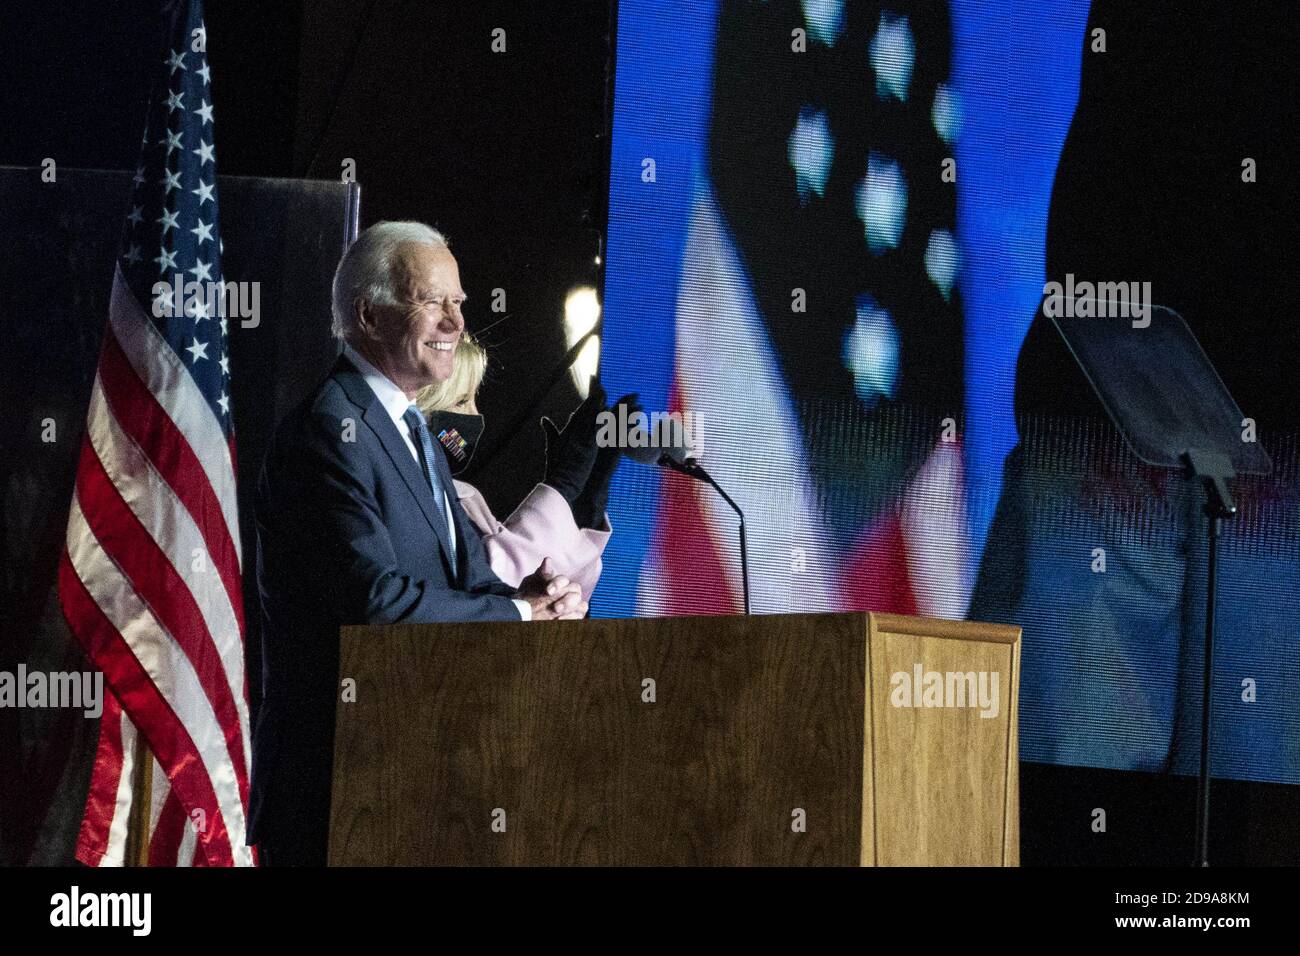 Wilmington, United States. 04th Nov, 2020. Joe Biden, 2020 Democratic presidential nominee, speaks as wife Jill Biden, right, listens during an election night party in Wilmington, Delaware on Wednesday, November 4, 2020. President Donald Trump has once again defied polls and predictions, with a strong showing across the Sun Belt in early results appearing to significantly shrink Biden's path to victory. Pool photo by Sarah Silbiger/UPI Credit: UPI/Alamy Live News Stock Photo